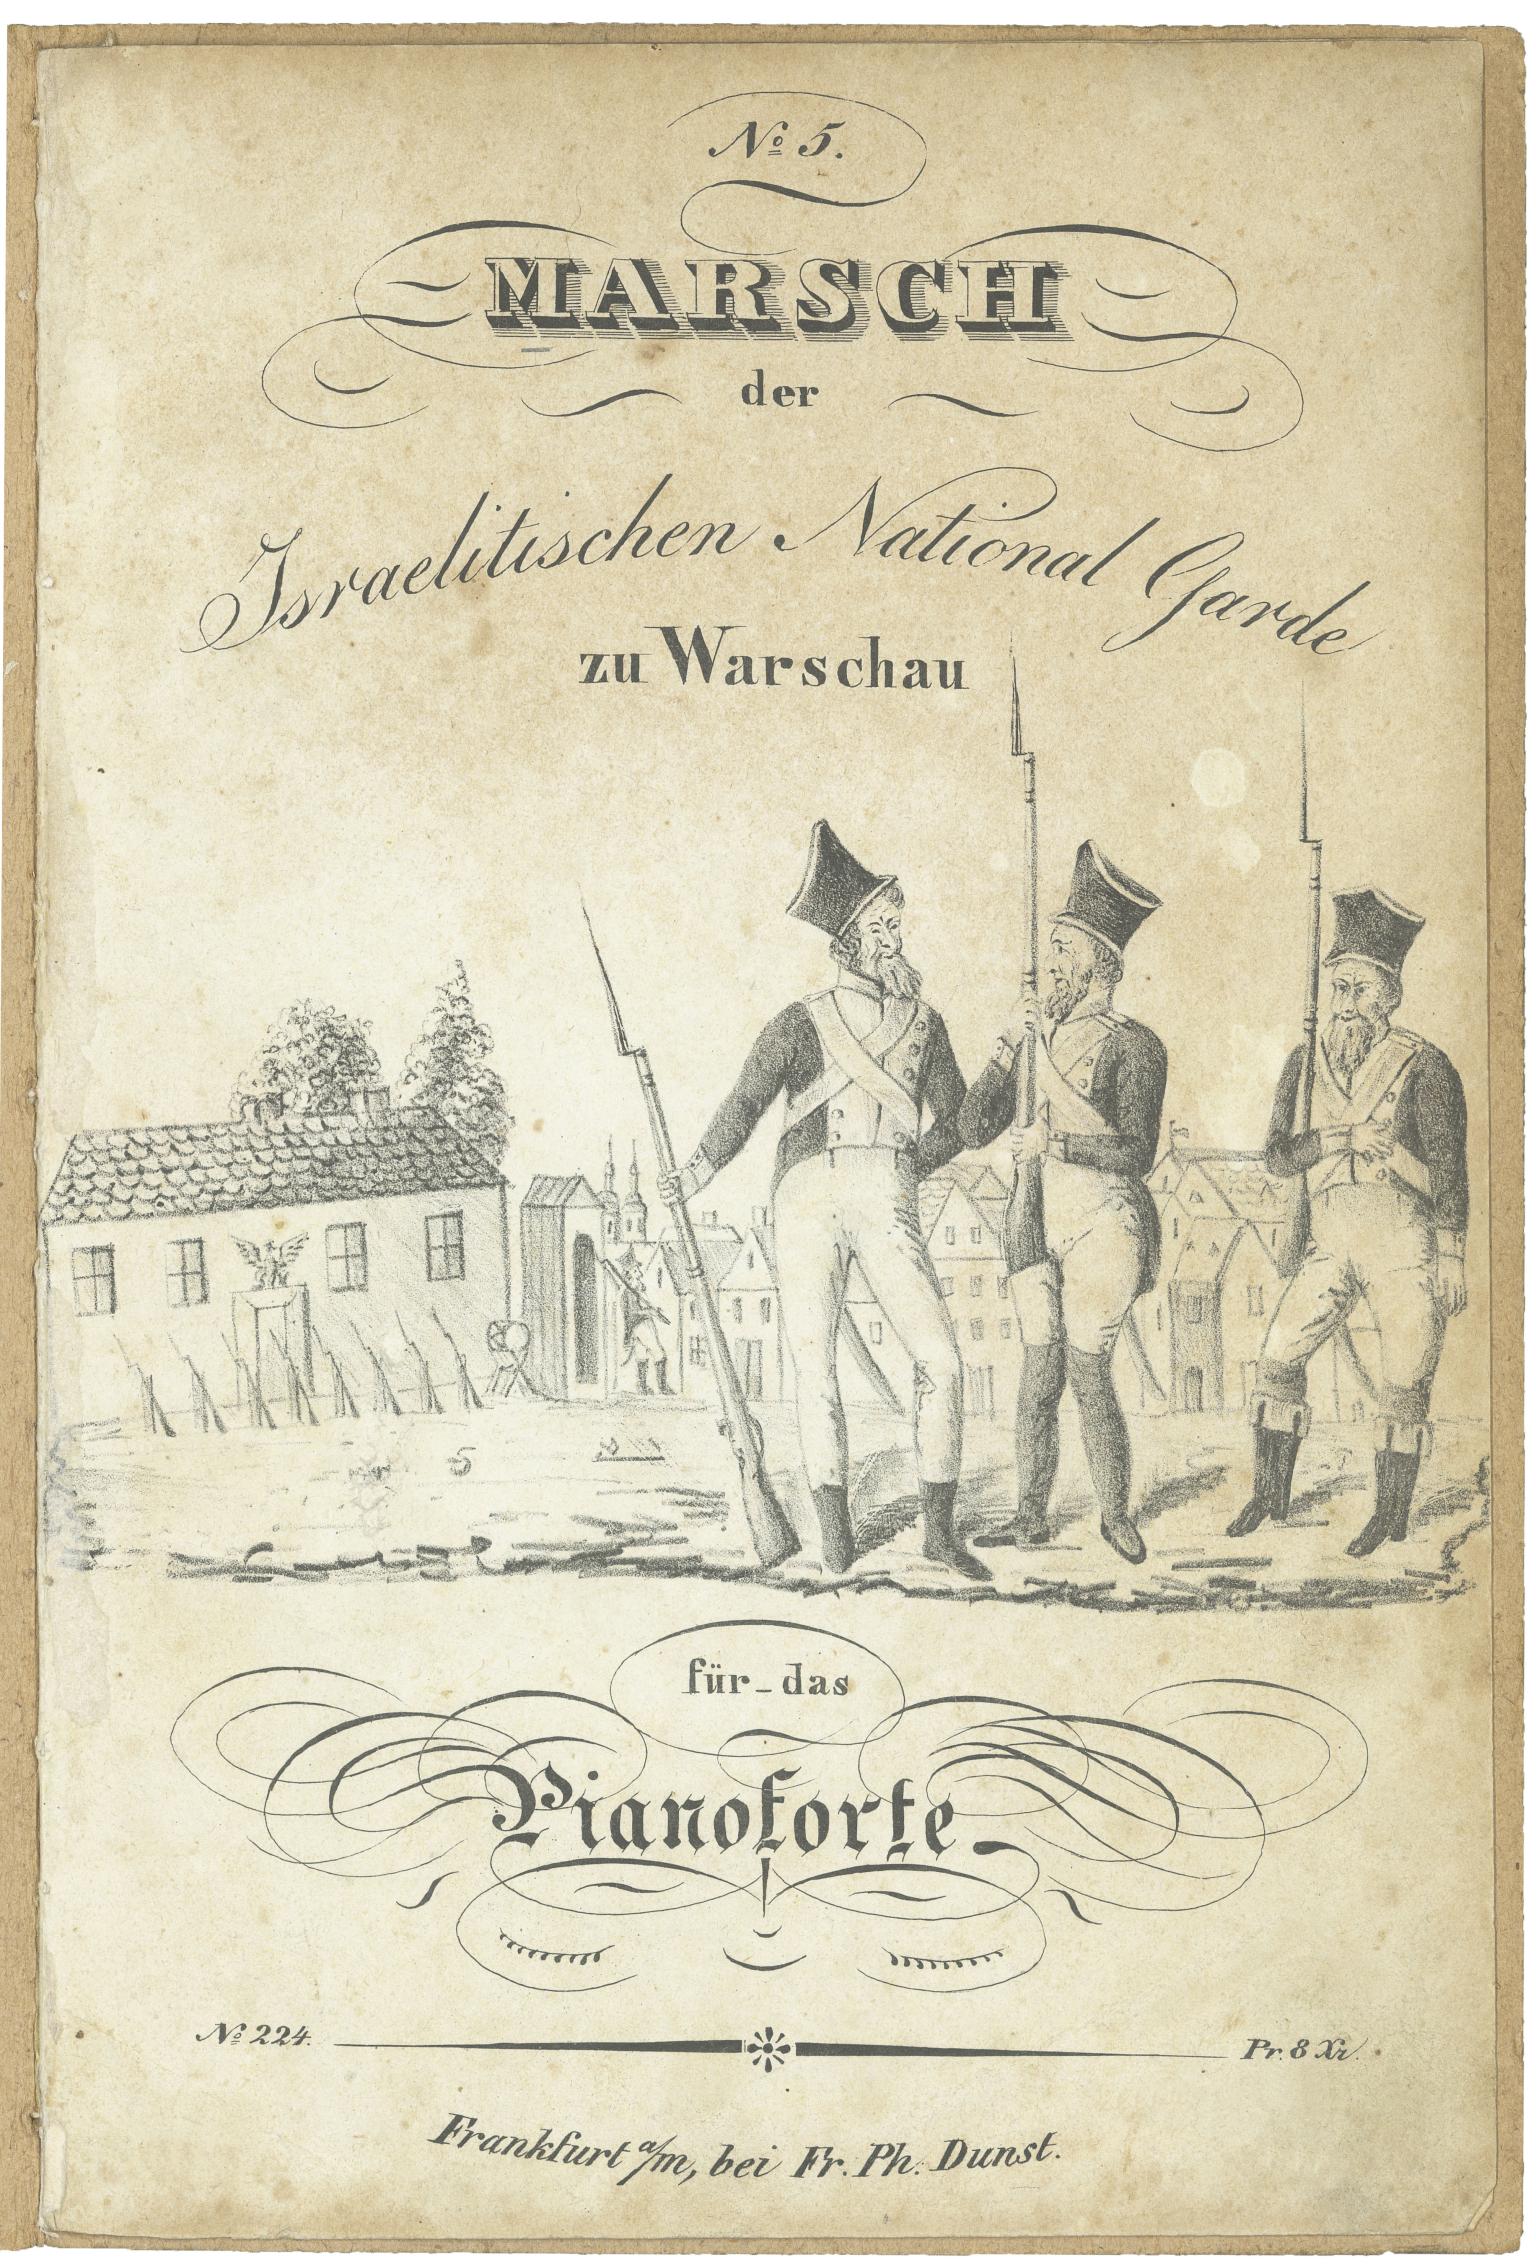 Page with drawing of three uniformed men holding bayonets and German headings above and below.